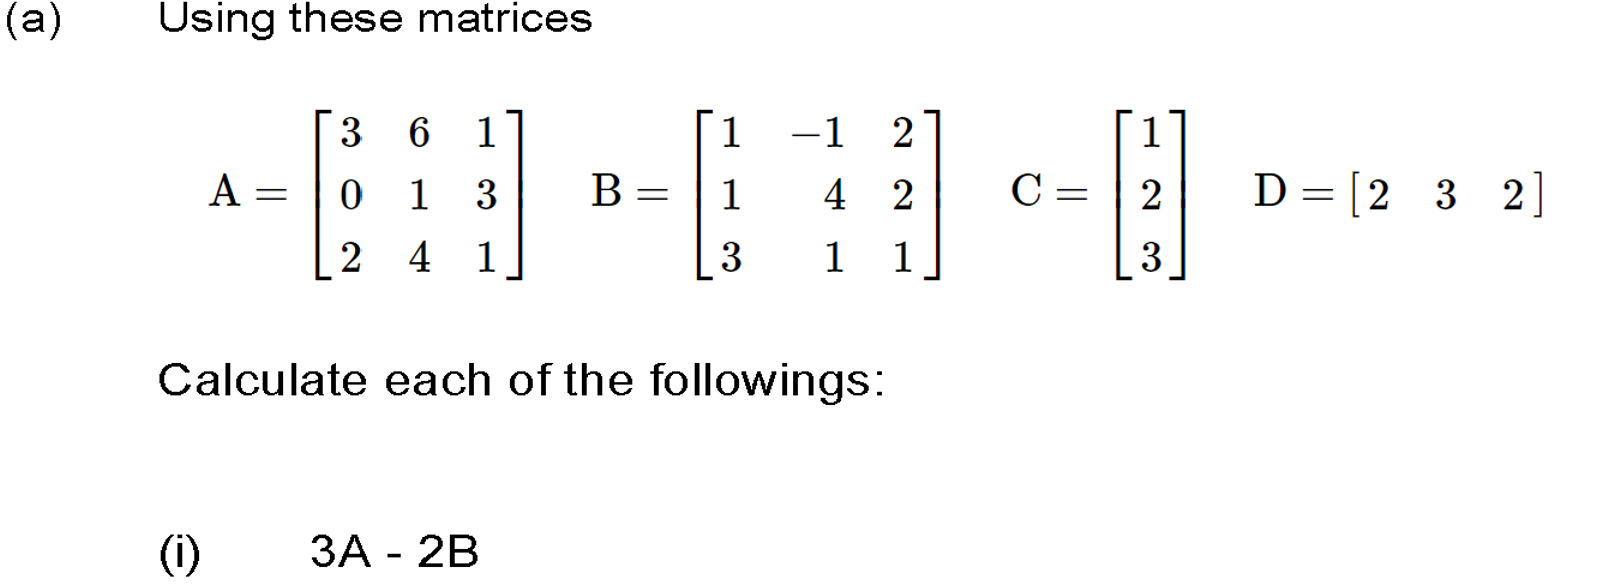 (a) Using these matrices A (i) = 3 6 1 0 1 3 2 4 1 B 3A - 2B = 1 1 3 Calculate each of the followings: -1 2 4